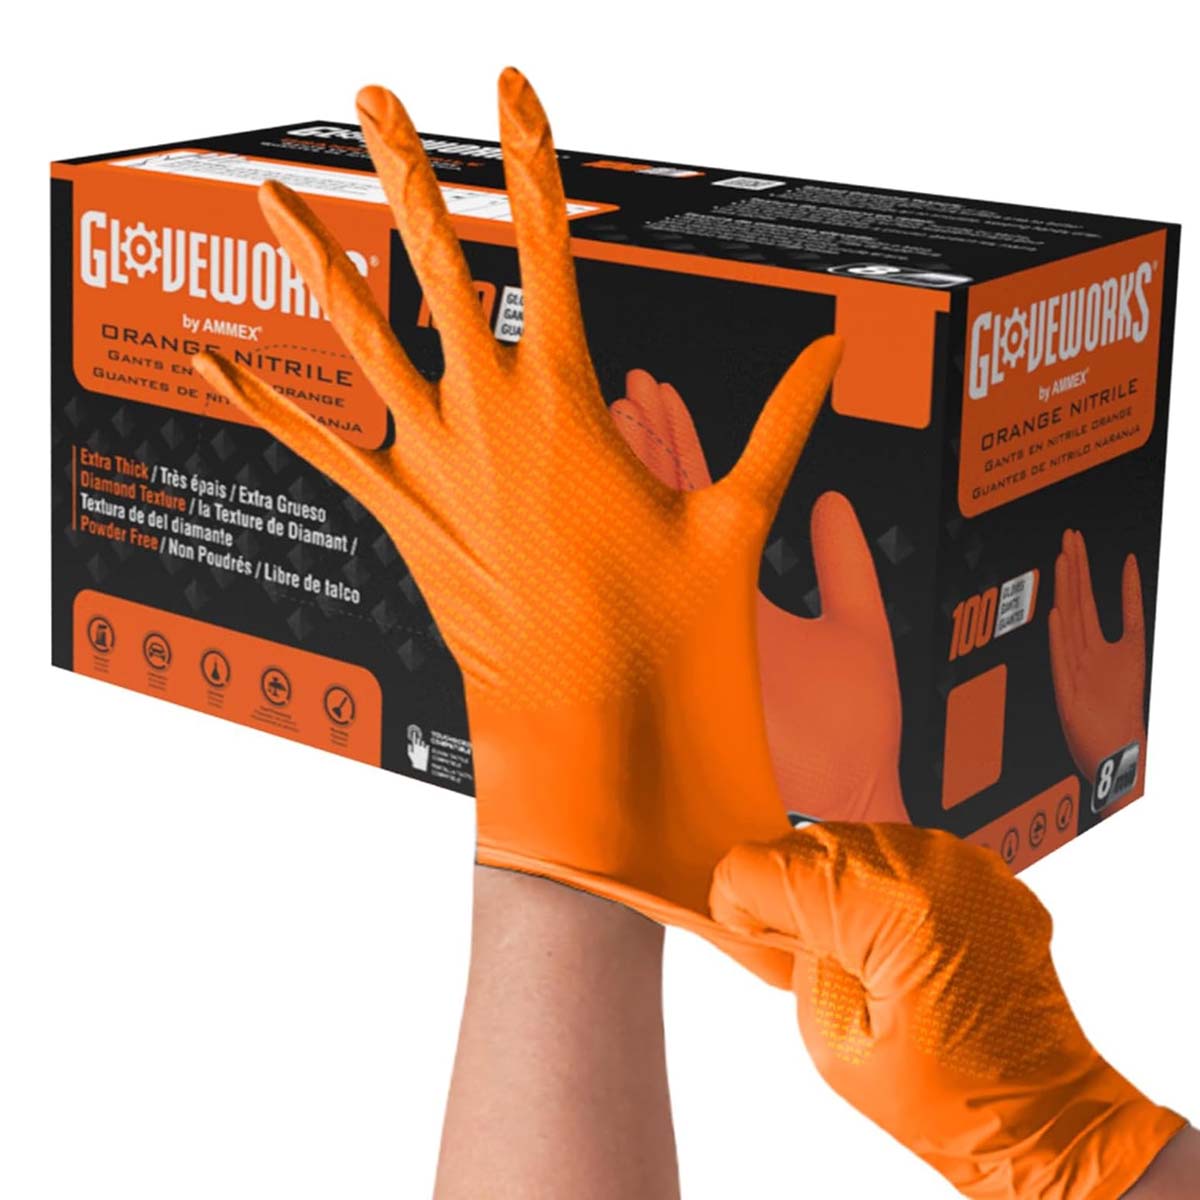 A box of Gloveworks Nitrile Disposable Gloves with hands wearing orange gloves.